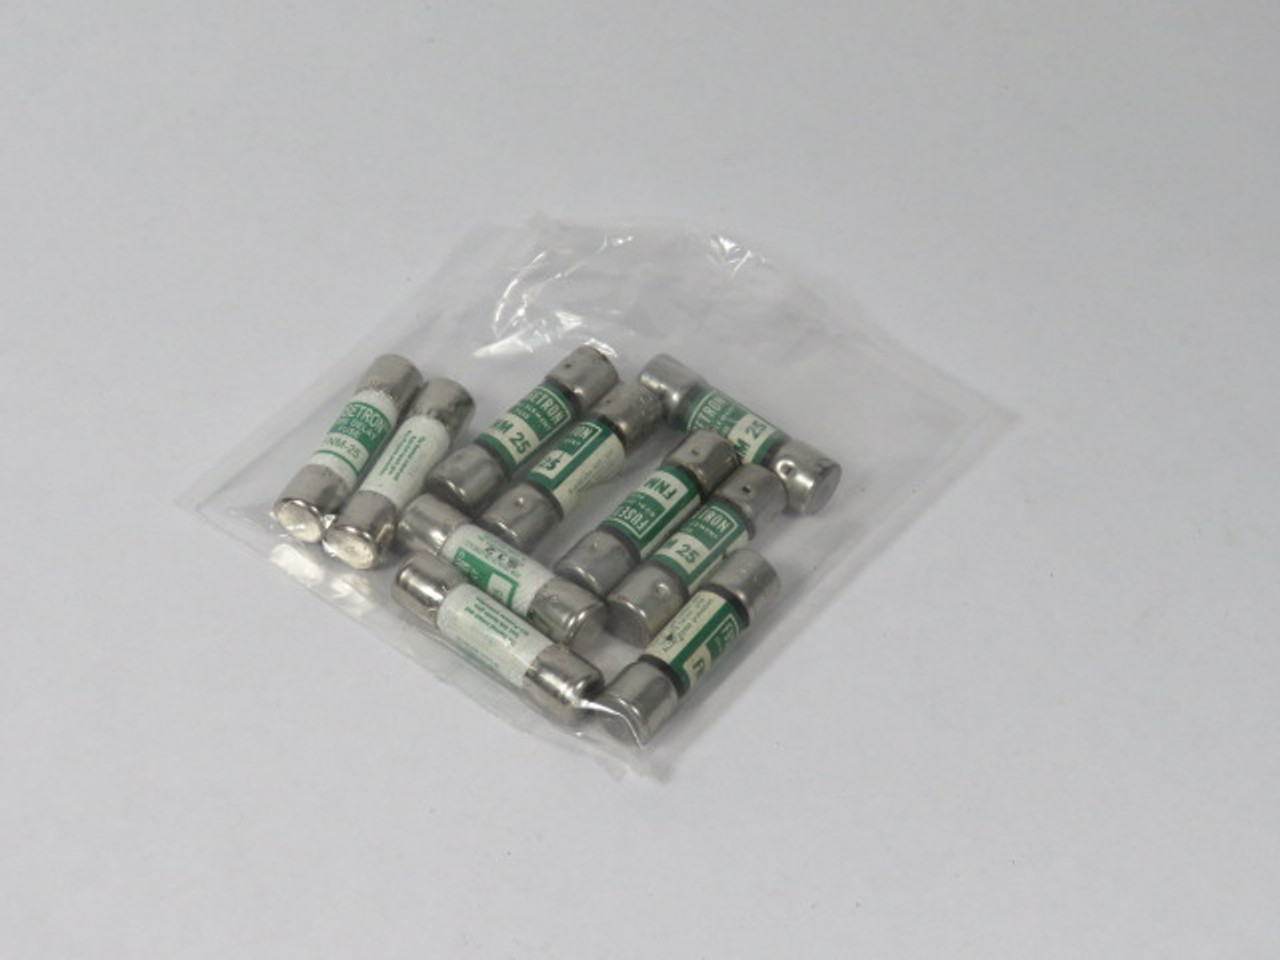 Fusetron FNM-25 Dual Element Fuse 25A 250V Lot of 10 USED